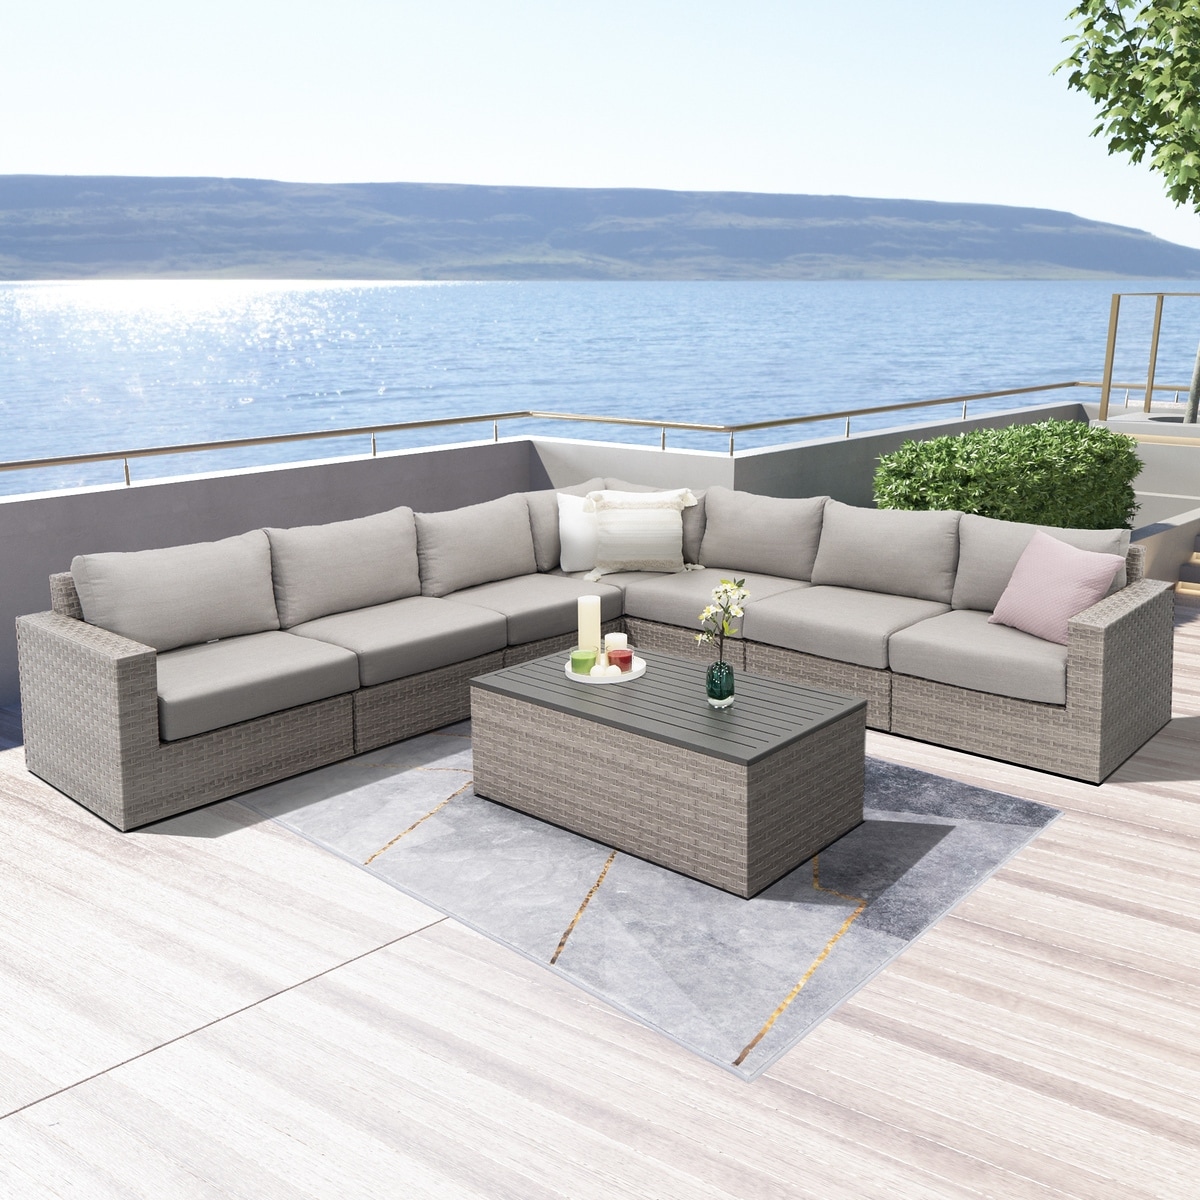 Avalon Bay 8-piece Deep Seating Sectional